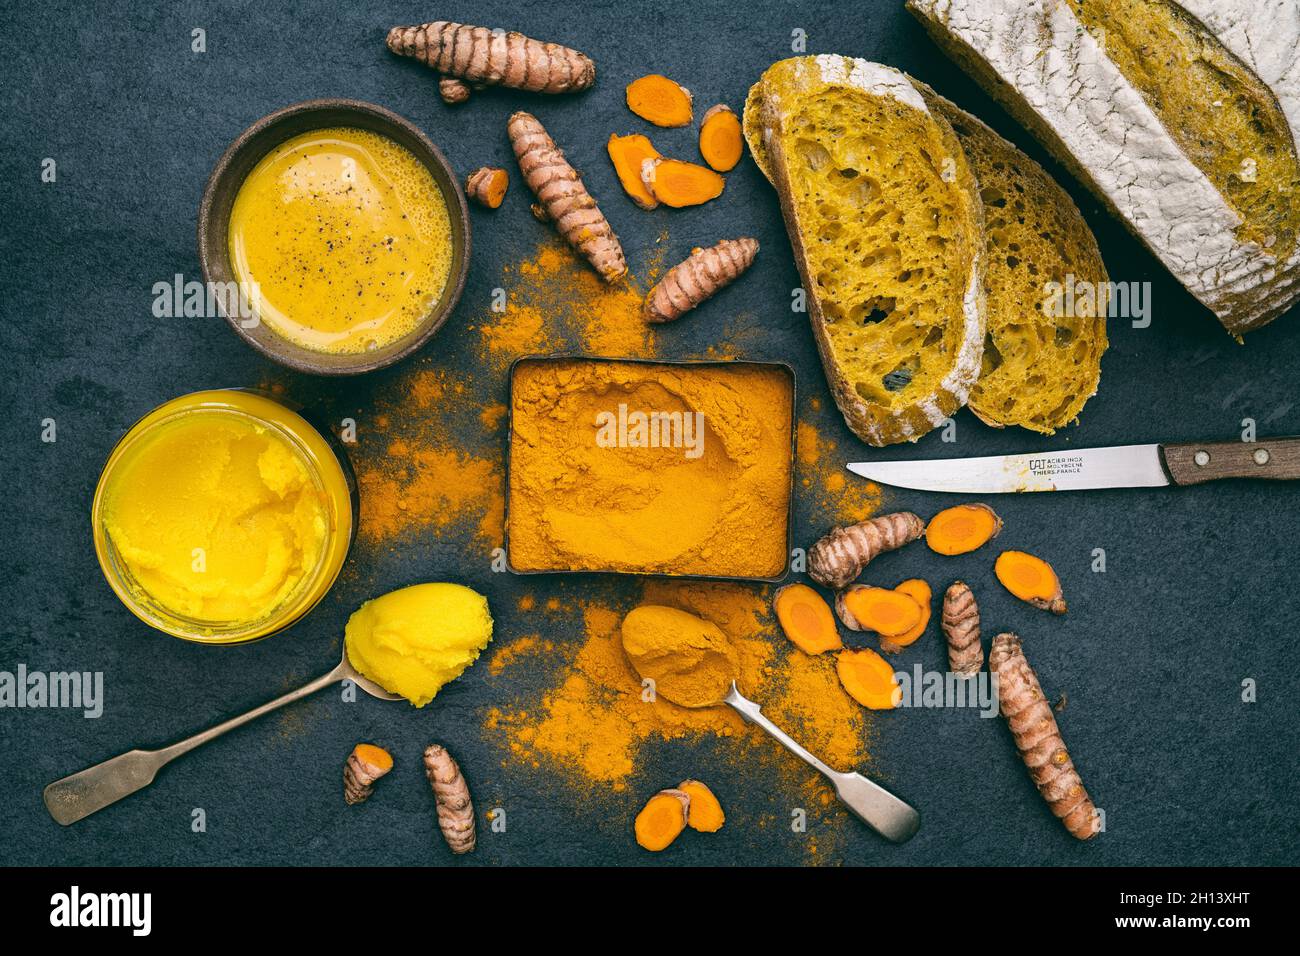 Turmeric powder, root, ghee, bread and golden milk on a slate background Stock Photo